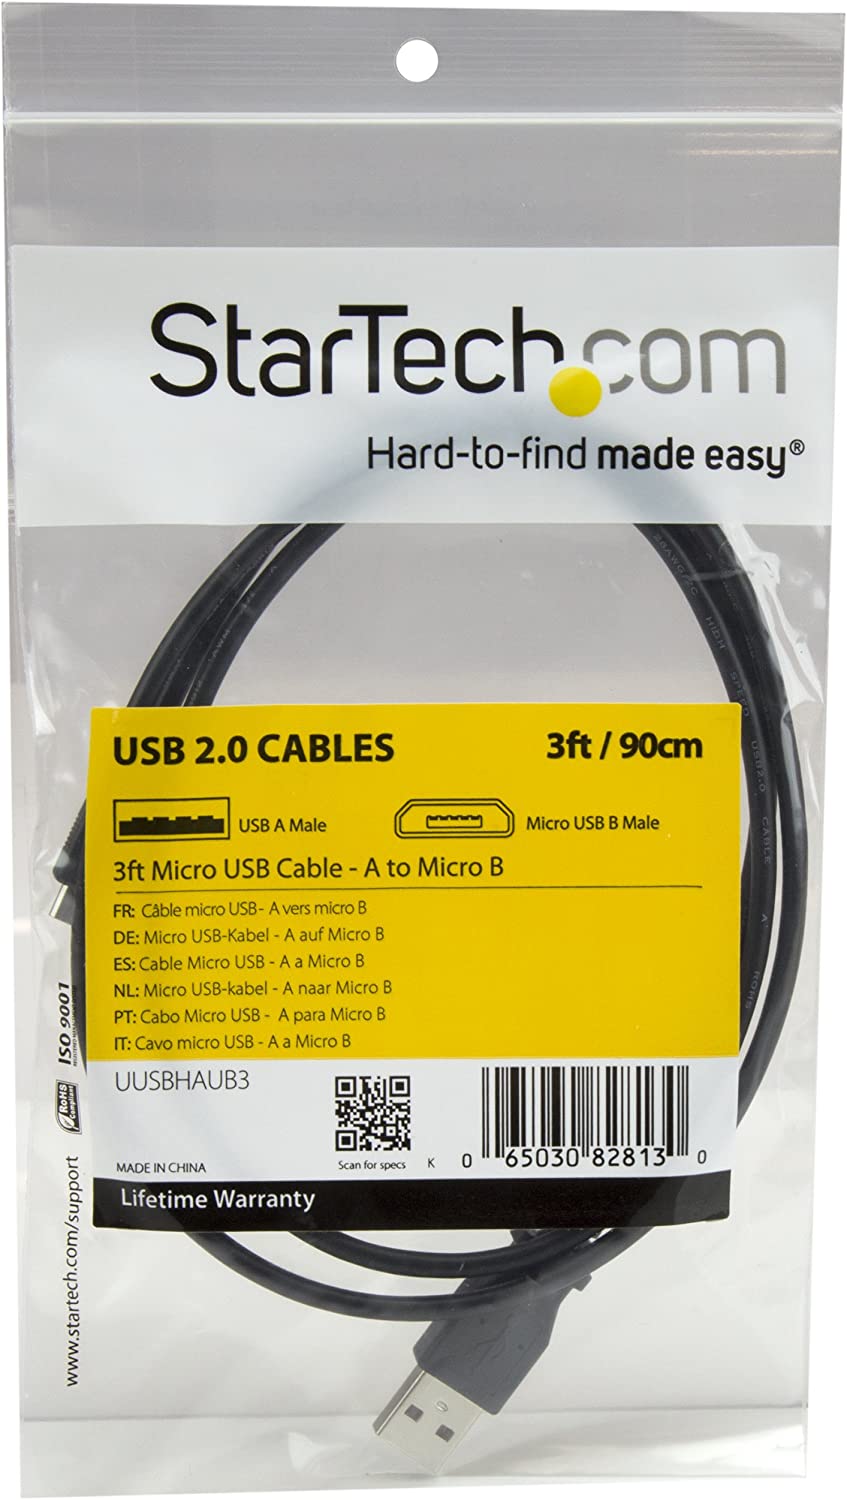 StarTech.com 3ft USB to Micro USB Cable - USB A to Micro B Charging Cable for your Micro USB Phone / Tablet / Android Device (UUSBHAUB3) 3 ft / 1m Straight